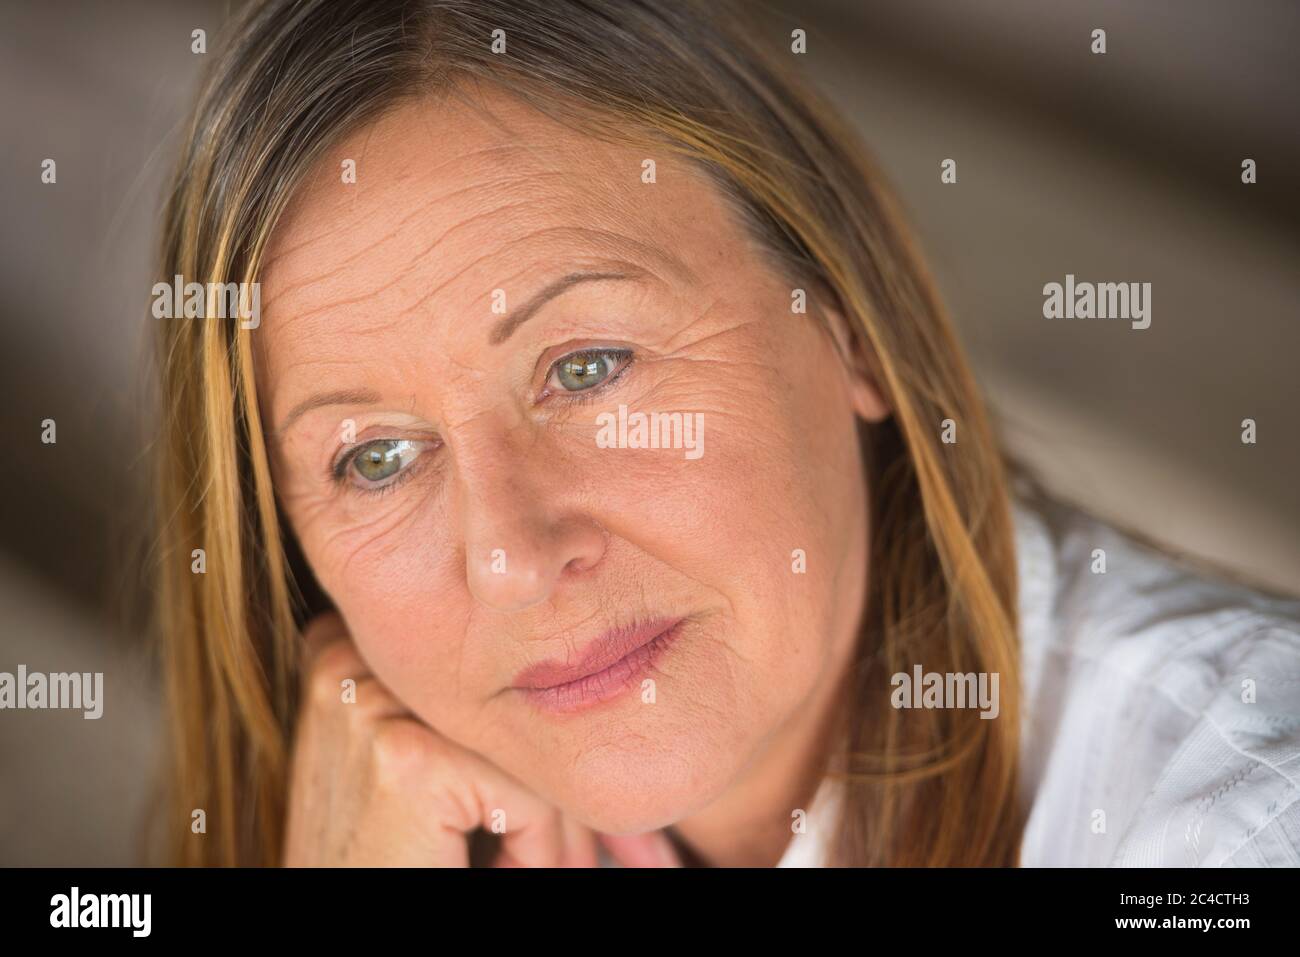 Portrait attractive mature woman with serious happy confident facial expression, thoughtful, blurred background. Stock Photo